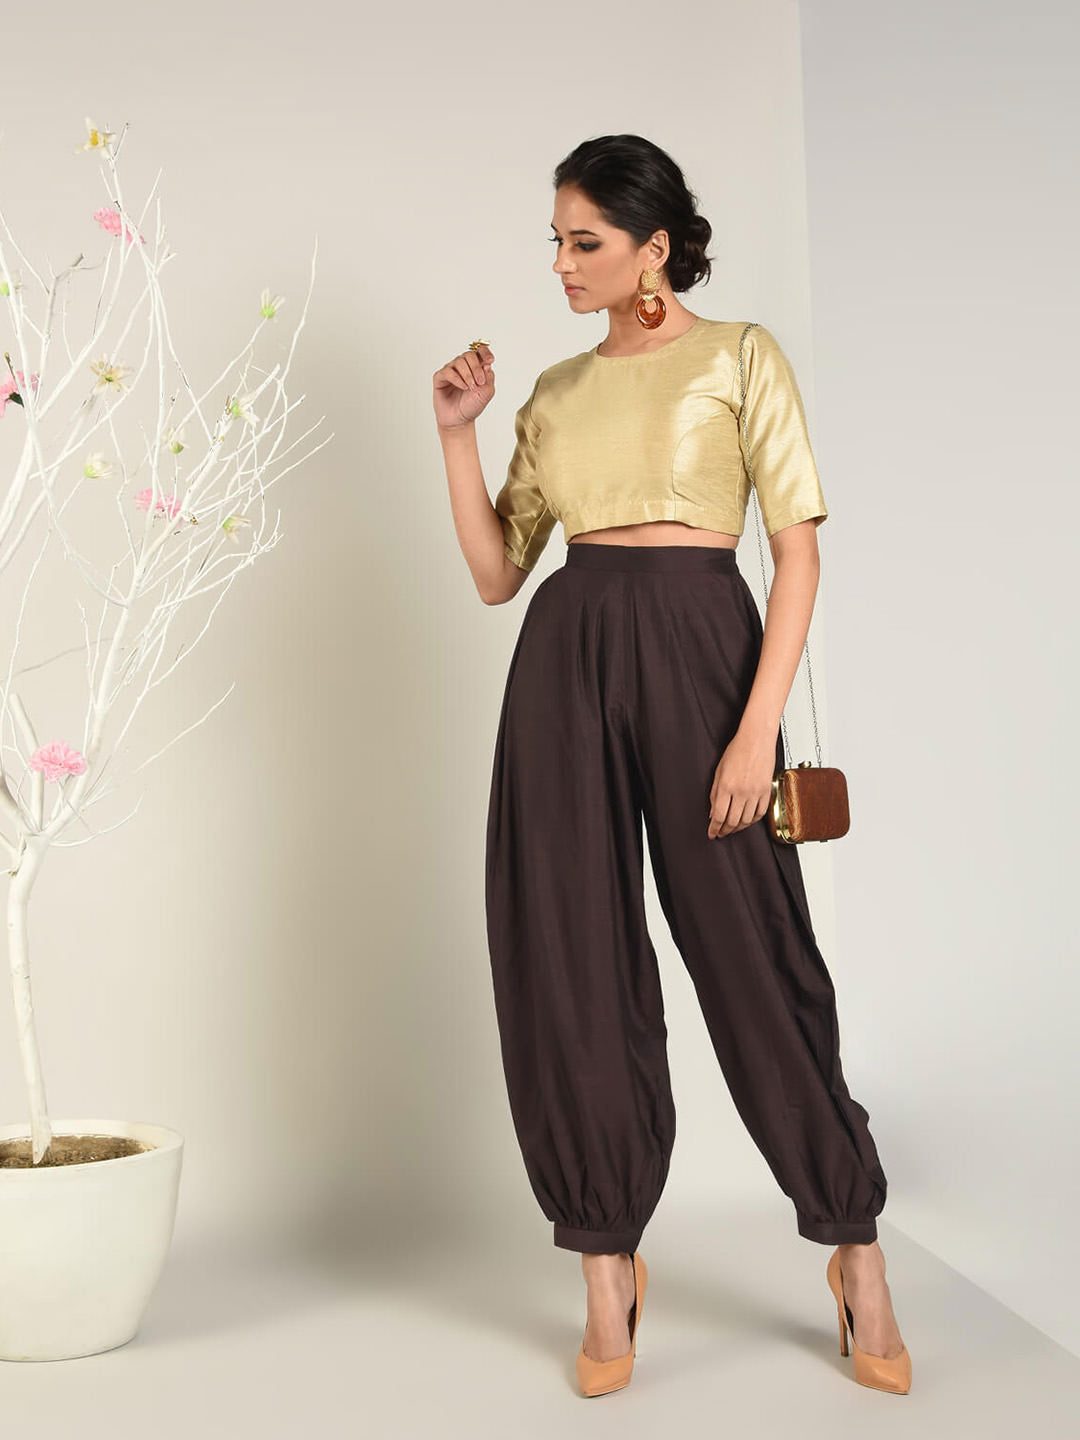 Readymade Dhoti Pant Indian style Pant For Men and Women Buy Online